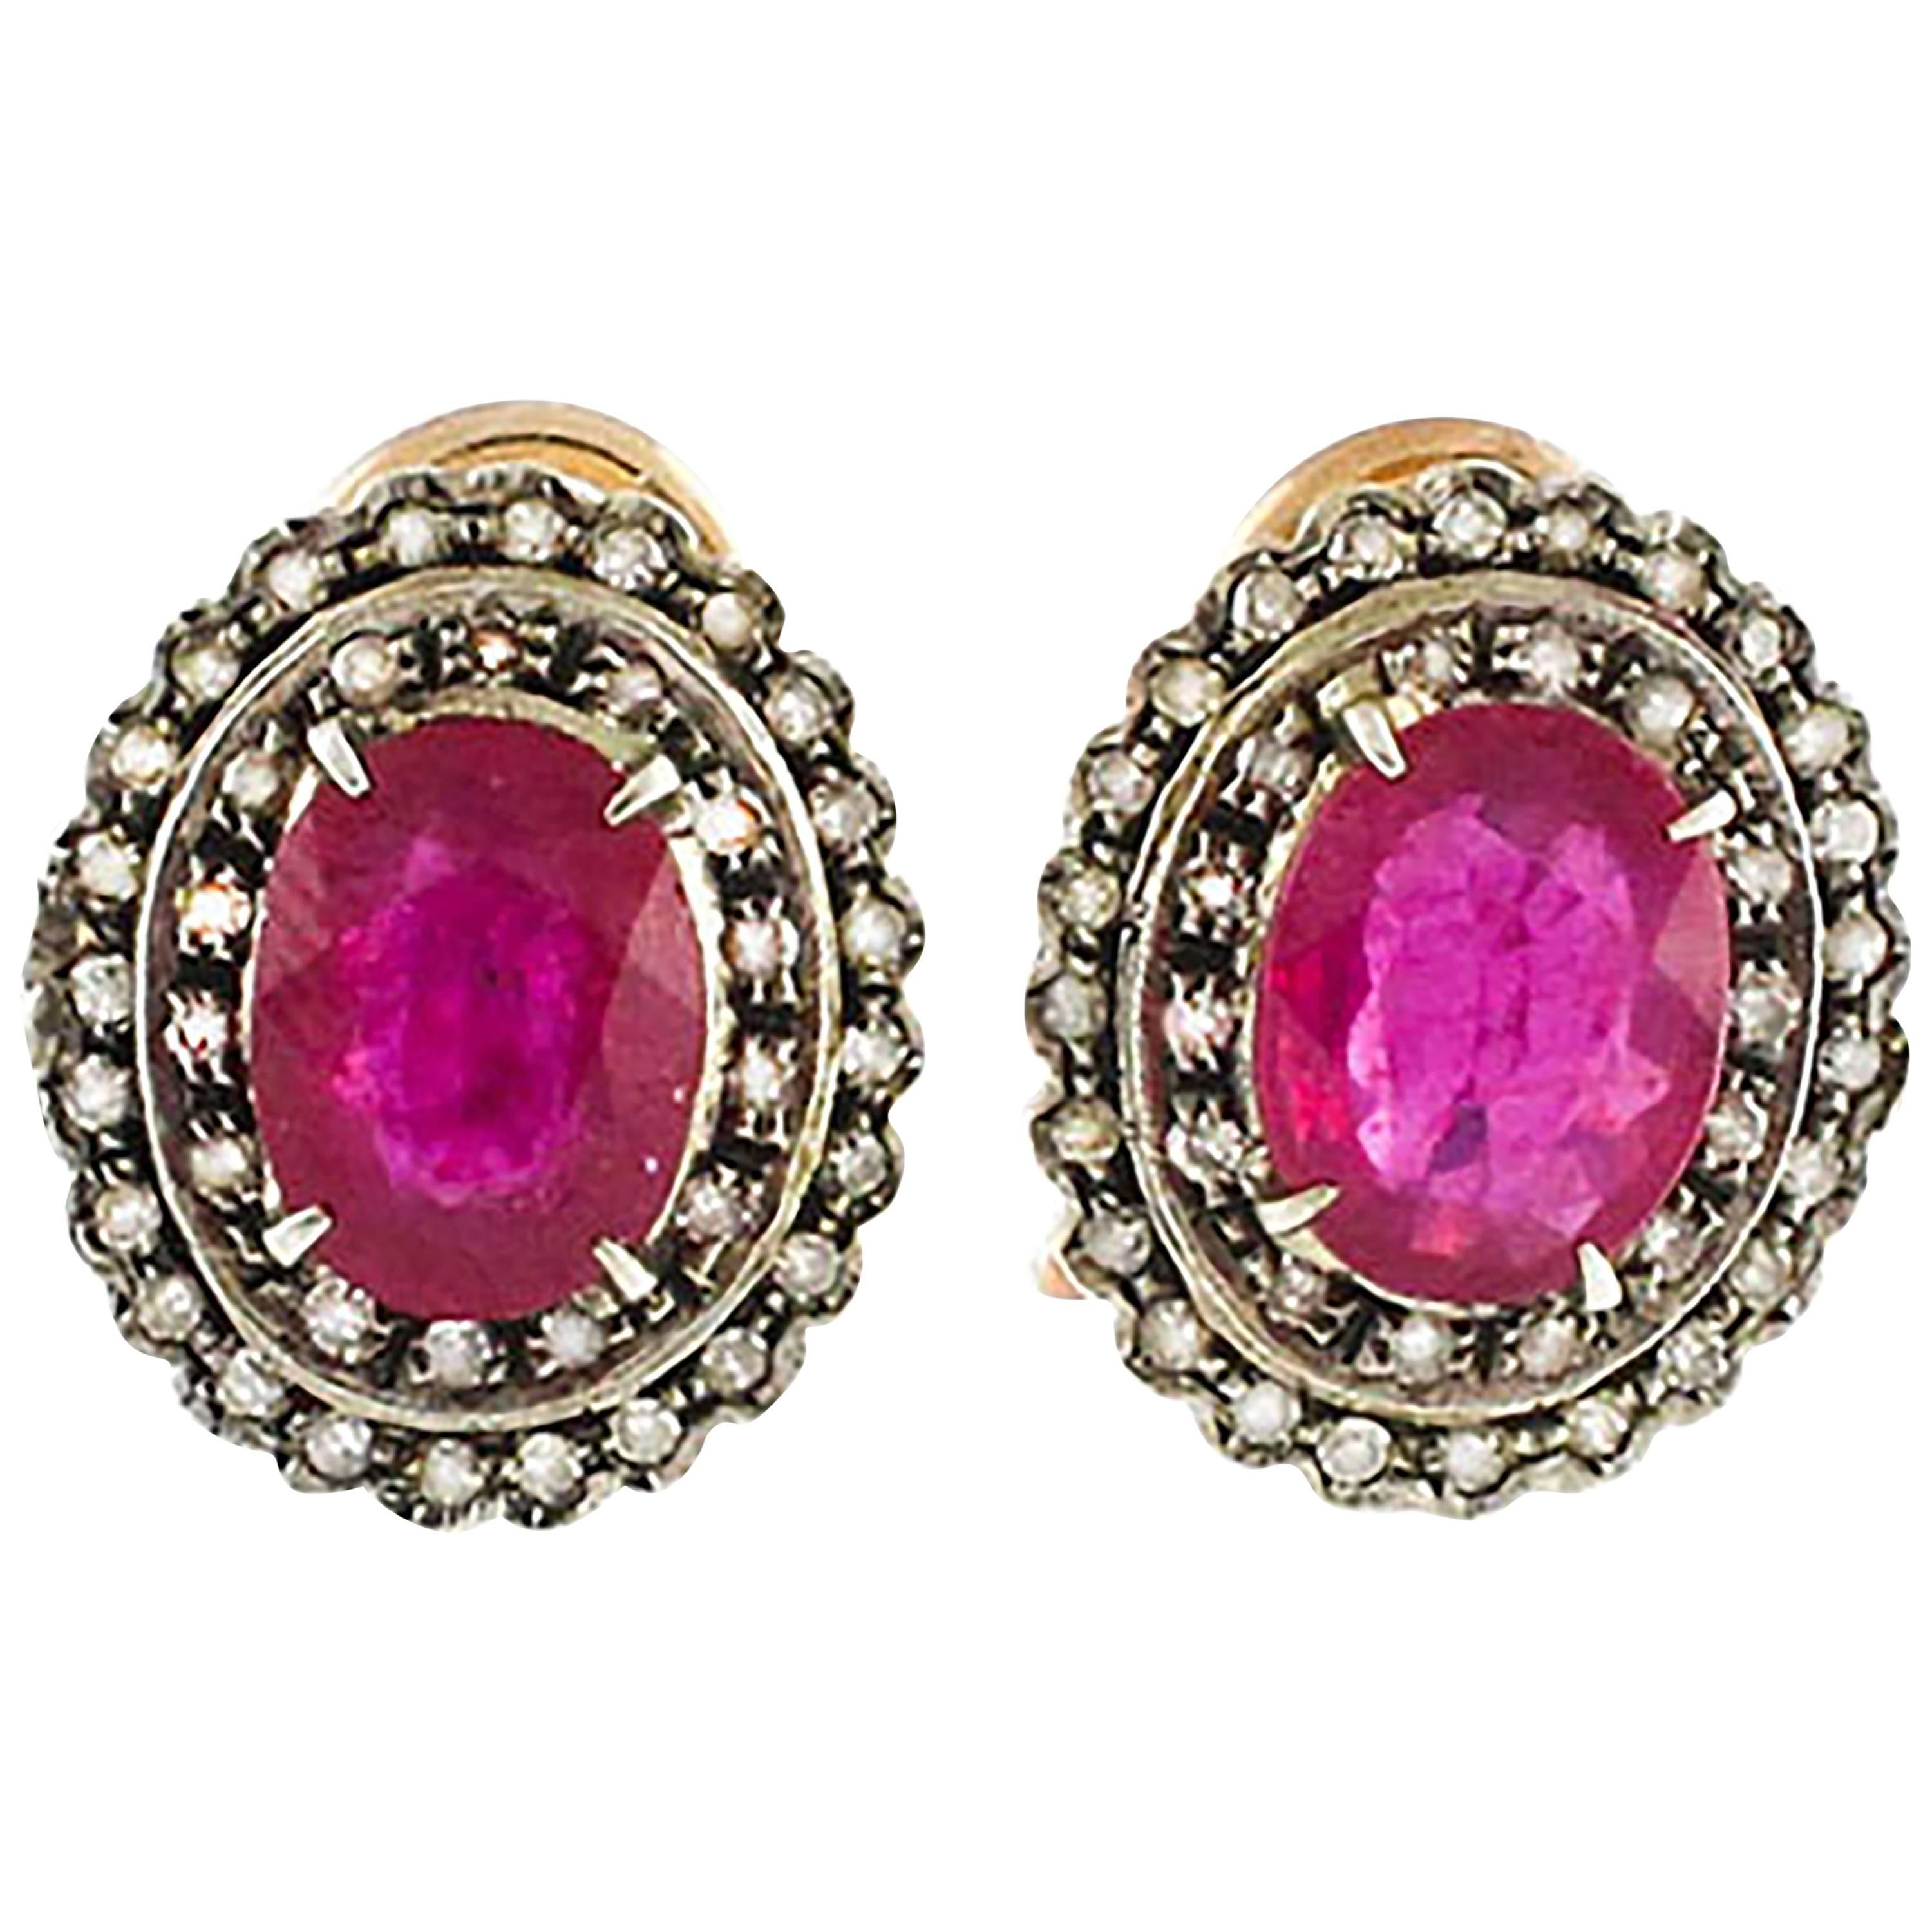 Rubies Old Diamonds Rose Gold and Silver Earrings 